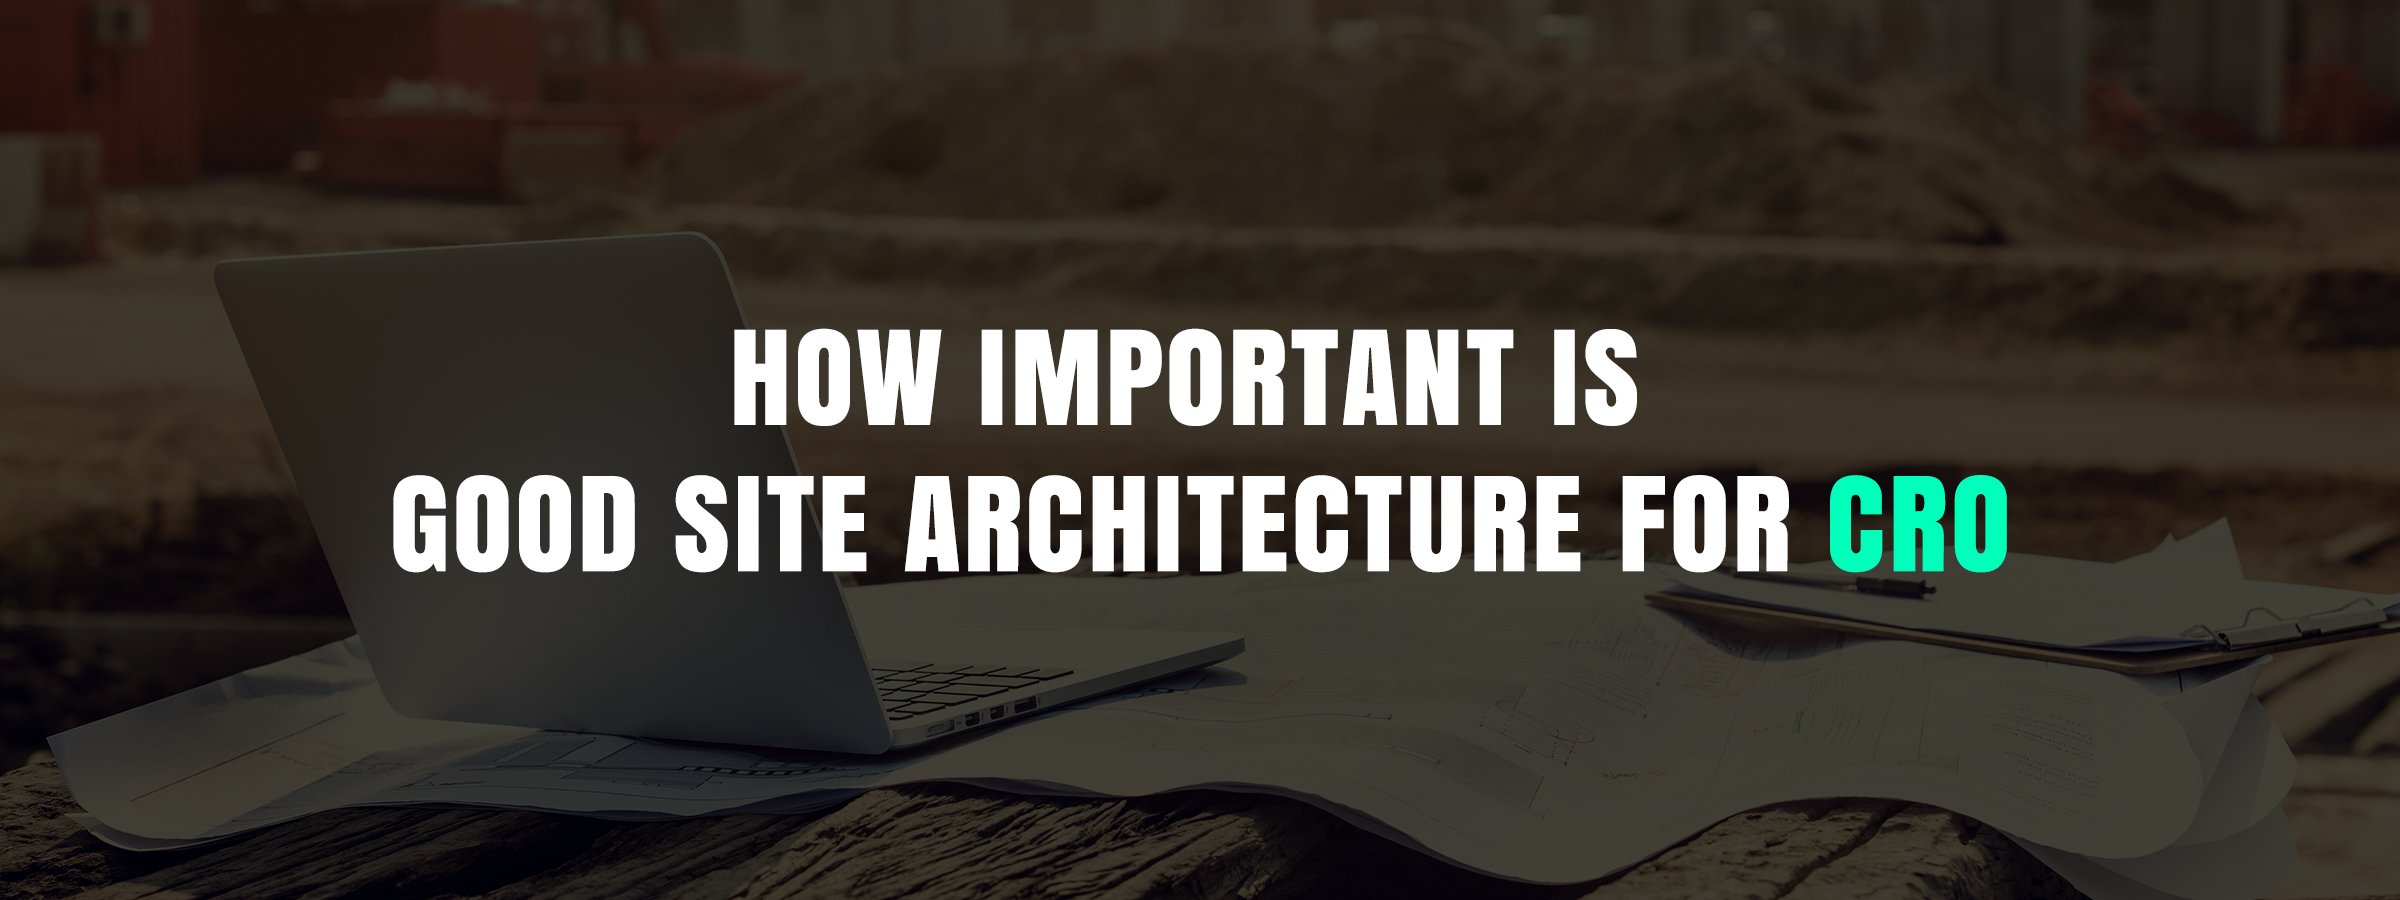 How Important is Good Site Architecture For CRO